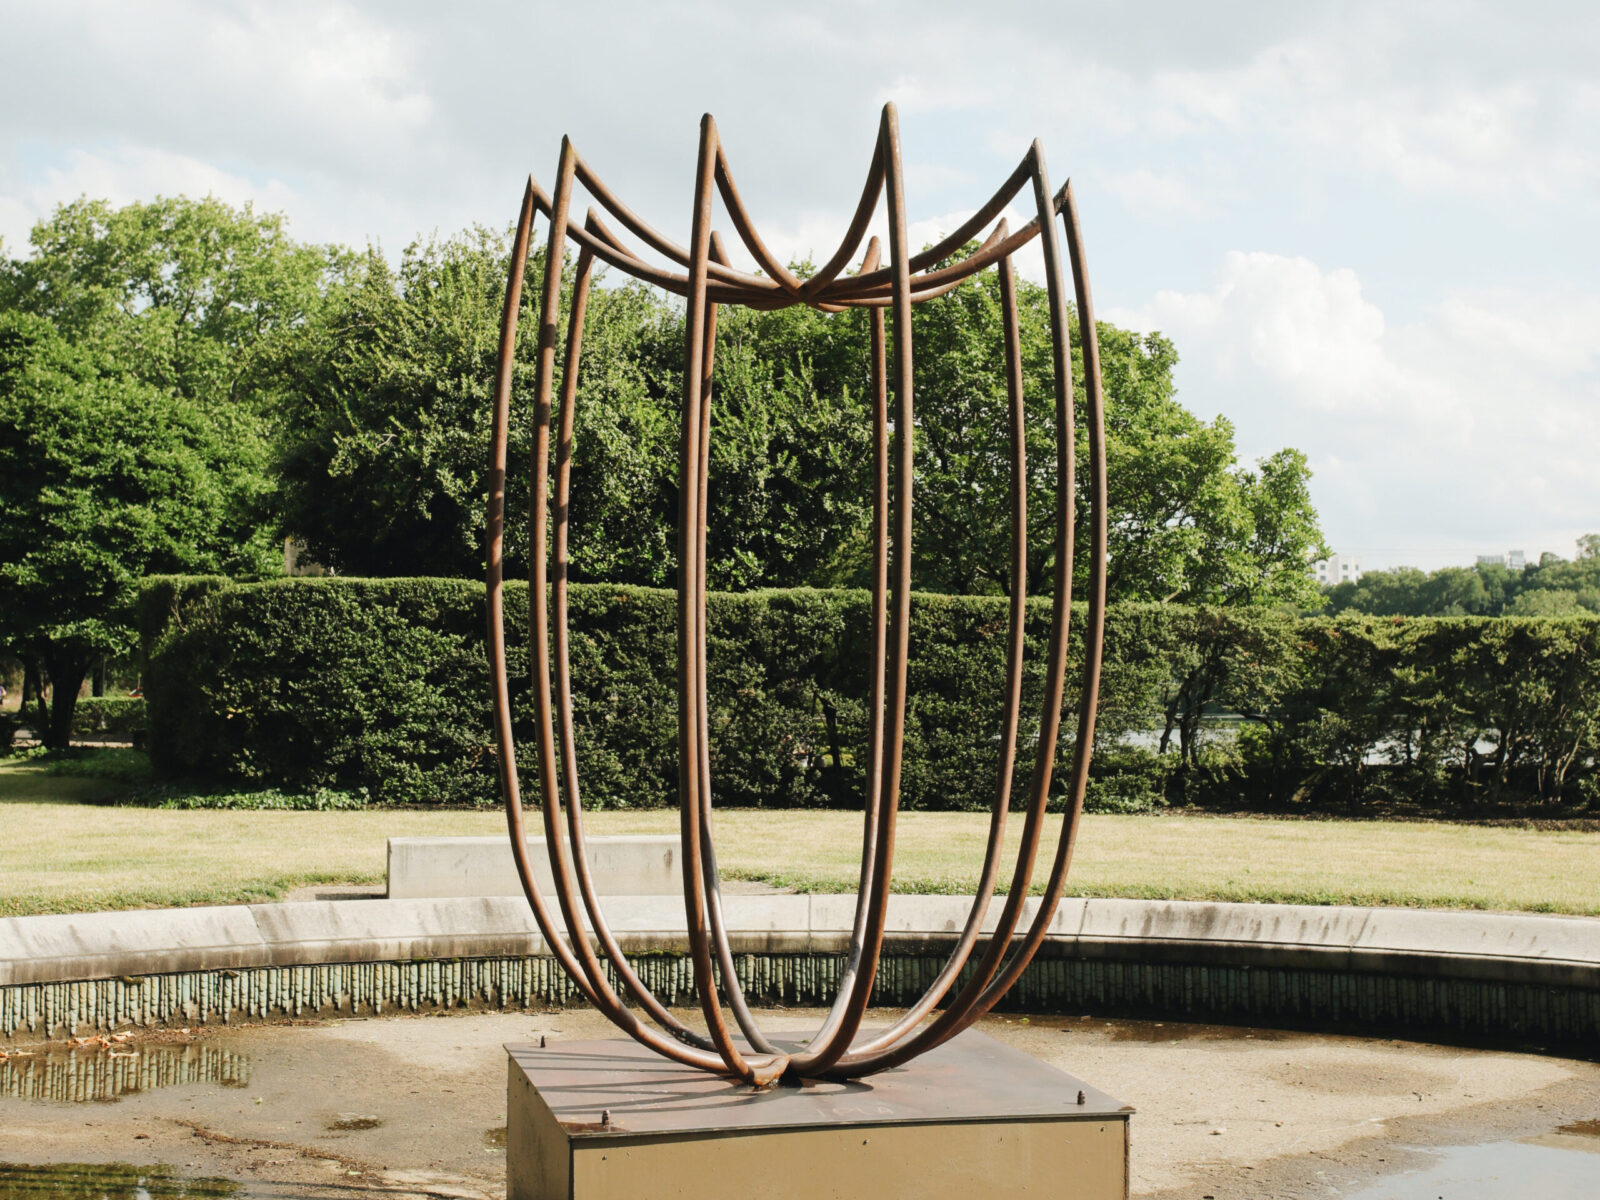 One of ten large-scale open metal vessel sculptures by Maren Hassinger, installed at the Ellen Phillips Samuel Memorial in Philadelphia, along Kelly Drive and the Schuylkill River. Inspired by ancient iconic vessel archetypes, the abstract sculptures suggest three-dimensional line drawings that vividly connect art with nature.